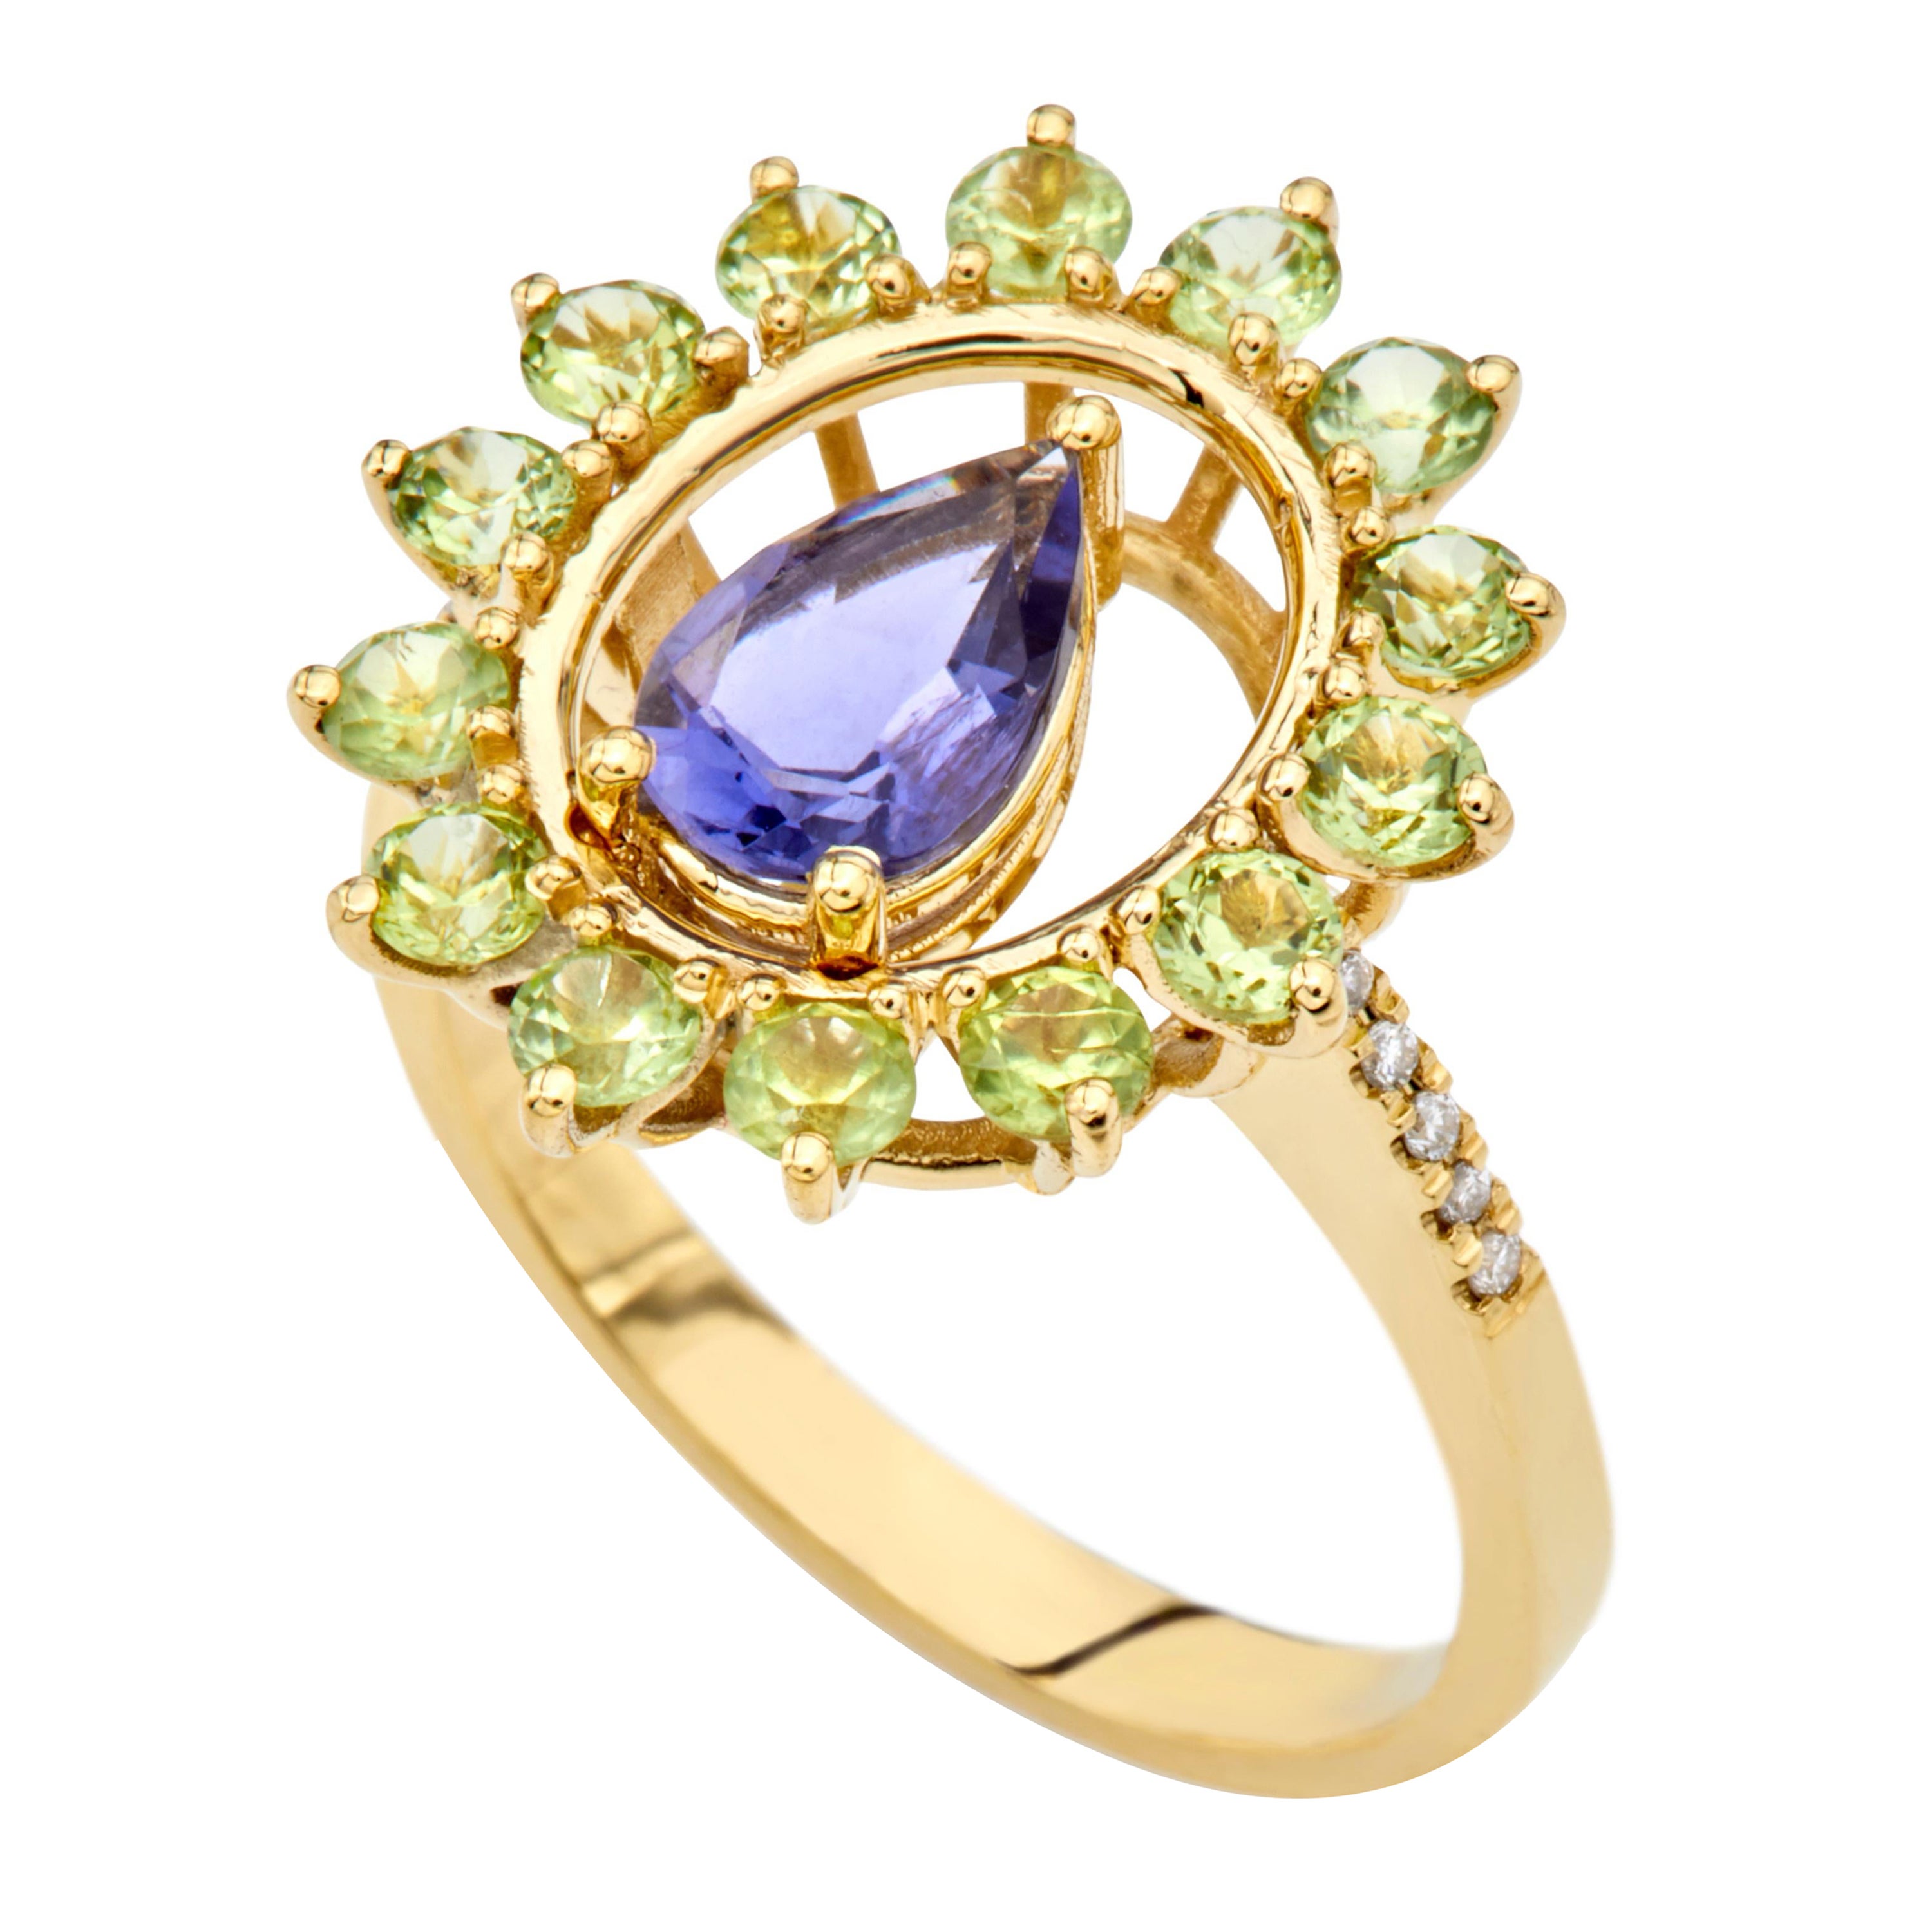 Ring in 18kt Yellow Gold Pear Iolite Peridots and Diamonds Oval Shape Cluster